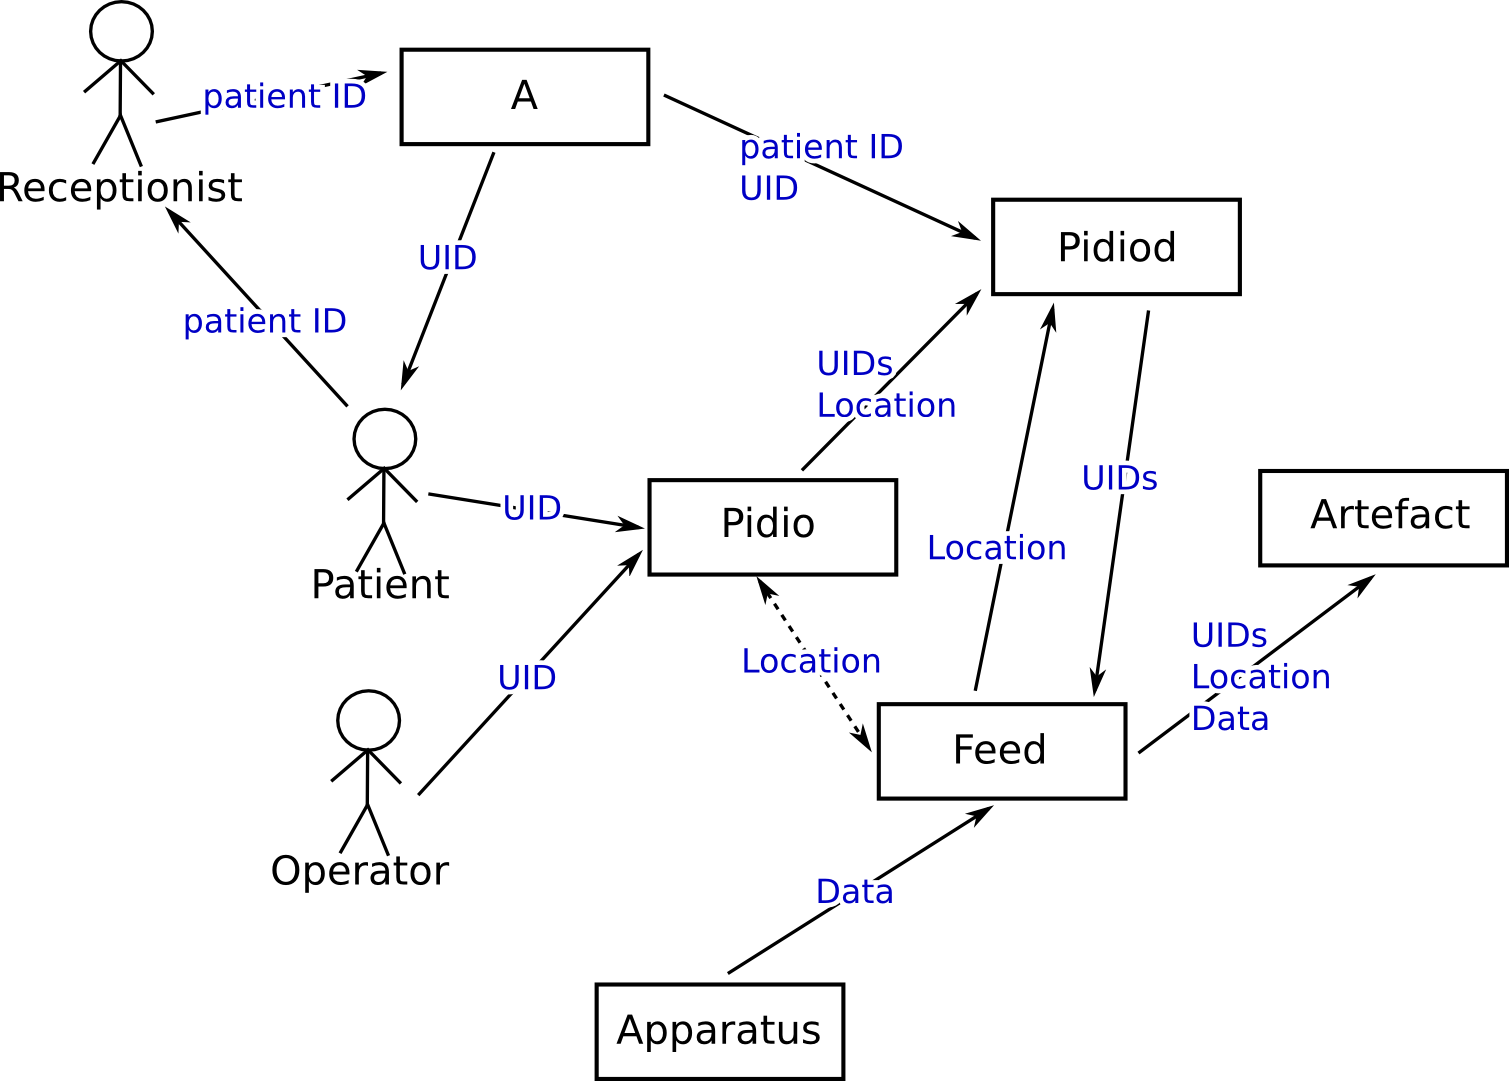 Systems overview diagram. Arrows indicate data transmission/sharing.